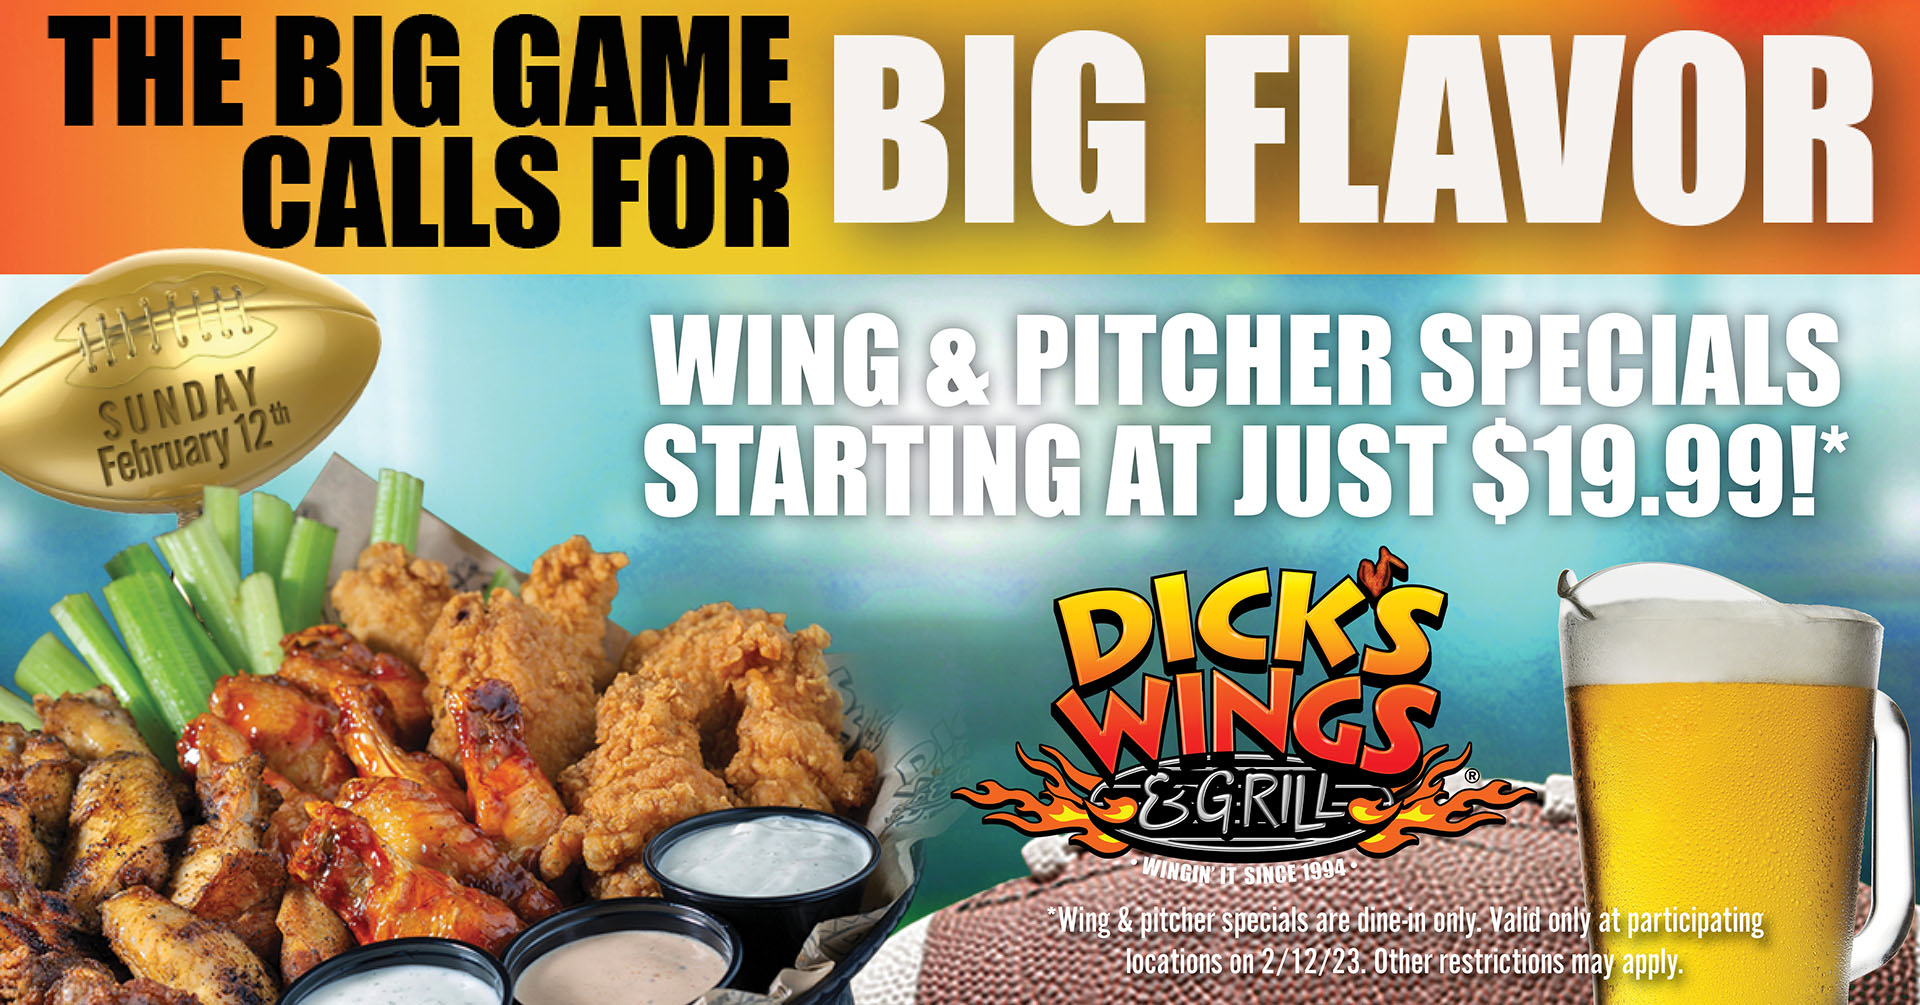 the big game calls for big flavor. wing and pitcher special starting at just $19.99